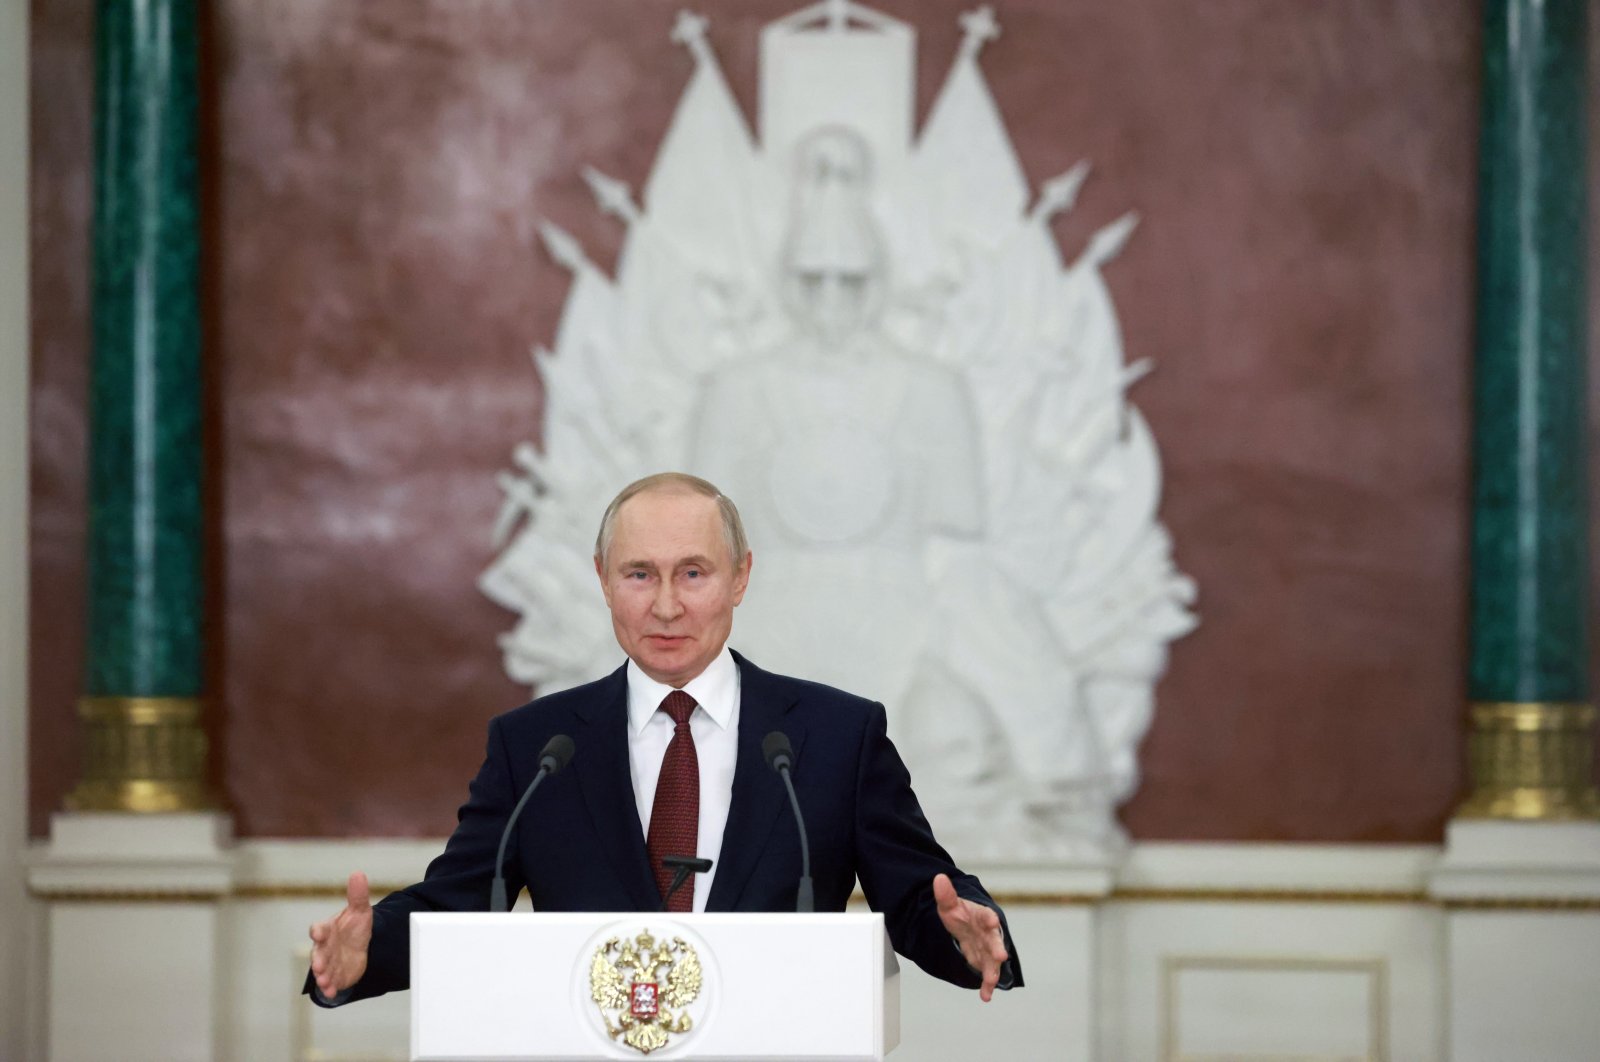 Russian President Vladimir Putin attends a news conference in Moscow, Russia, Dec. 22, 2022. (IHA Photo)